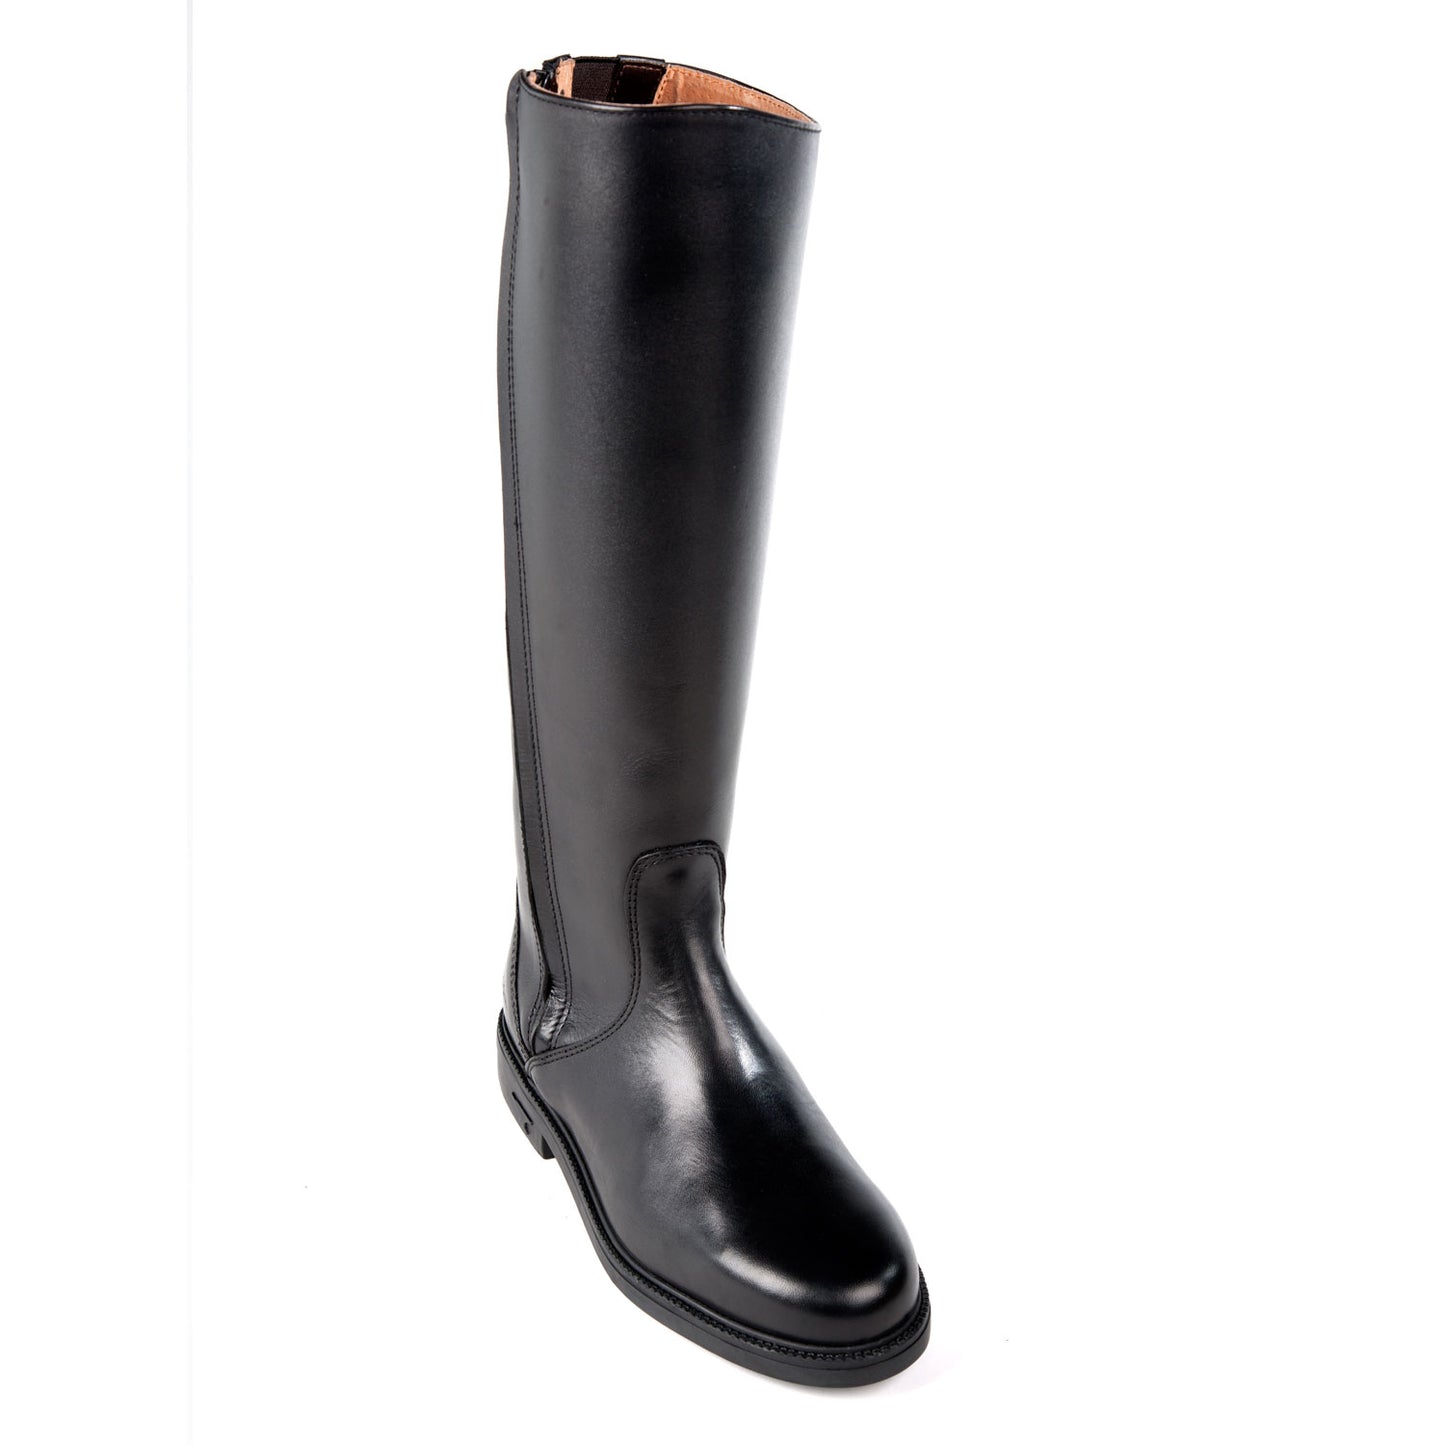 Breckland Plus-Size Riding Boots